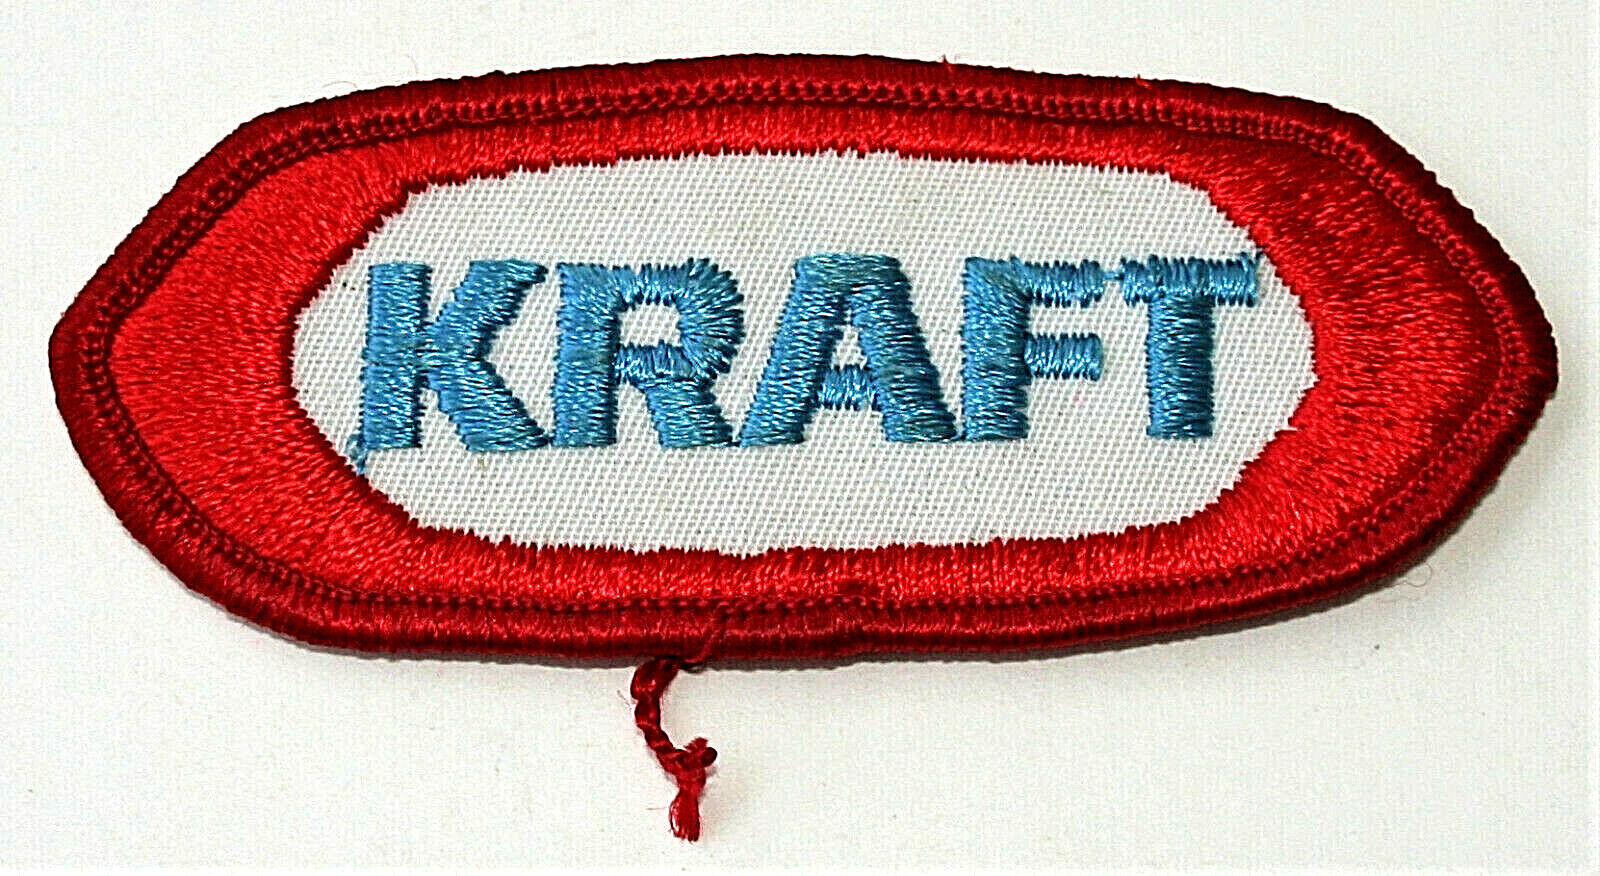 Vintage Kraft Foods Foods Dairy Cheese Logo Patch New NOS 1980s